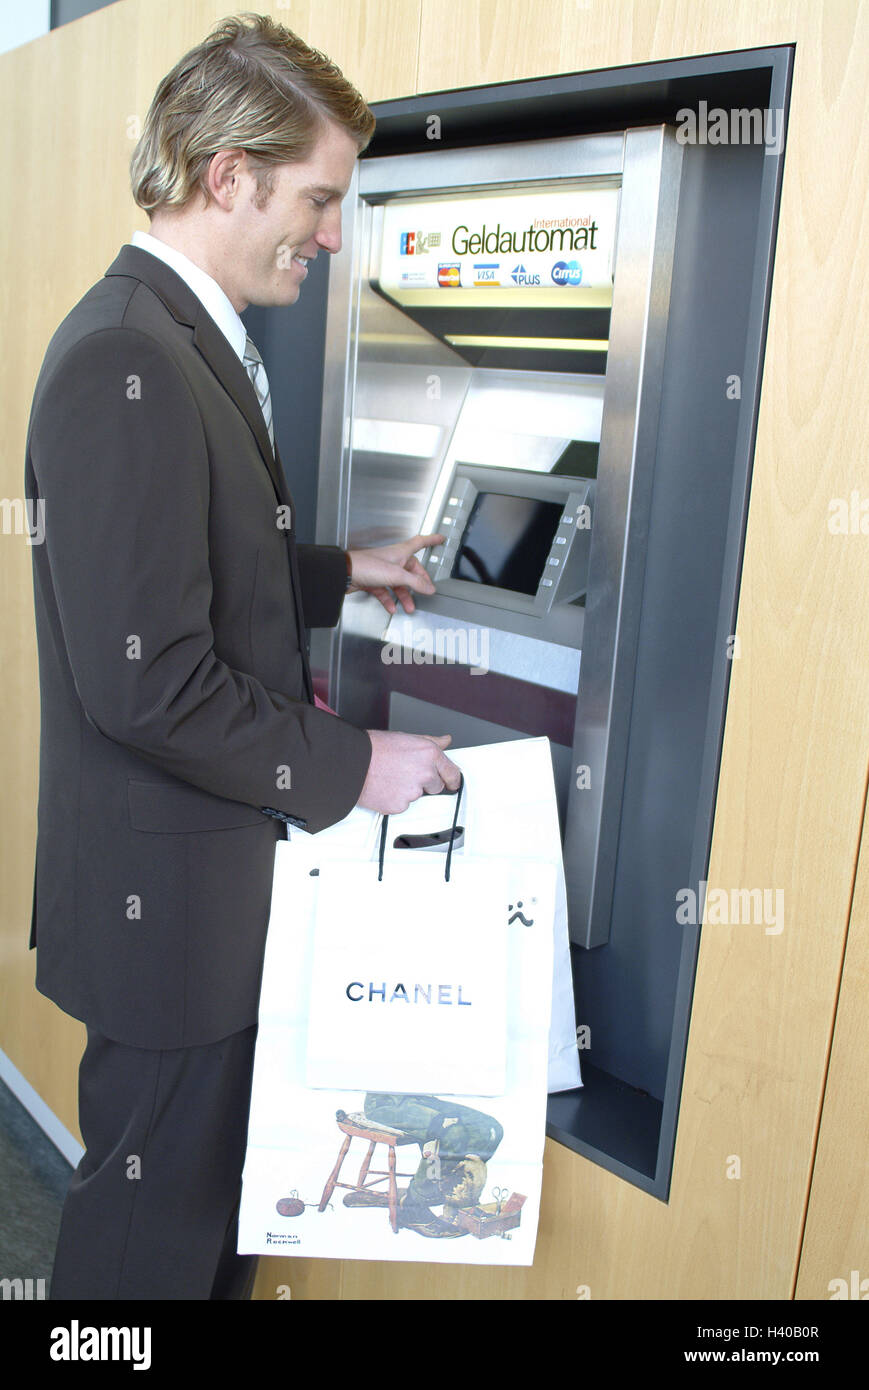 Bank, man, suit, bancomat, carrier bags, noble marks, business, economy, consumption, credit institute, high-speed train machine, cash dispenser, automatic cash dispenser, businessman, customer, bank customer, young, elegantly, account holder, keyboard, a Stock Photo